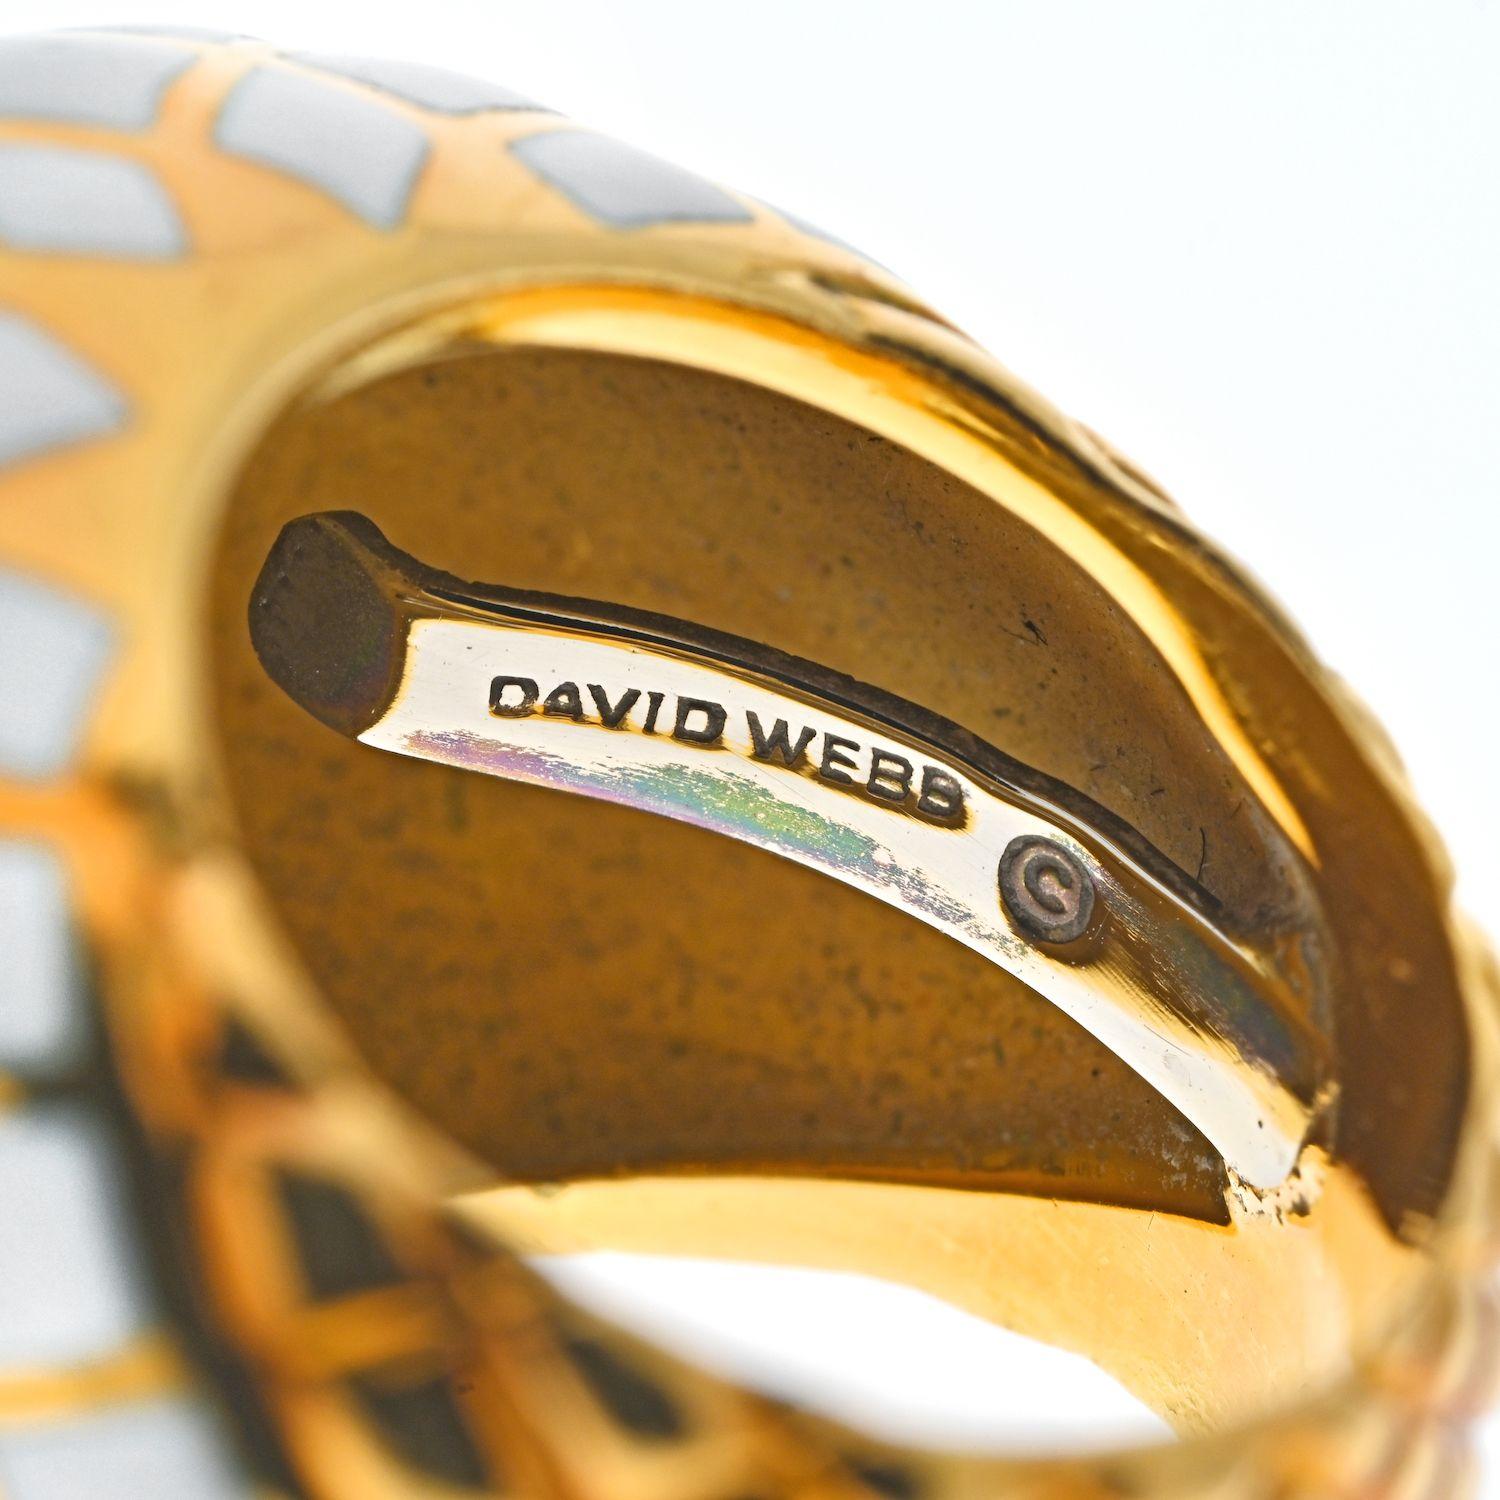 Classic ring by David Webb that is an iconic staple: a bombe yellow gold enameled ring.
This one is a lovely ring crafted in 18k yellow gold, applied with white enamel on it's bombe shaped shank. 
Elegant, yet never boring this is what we love about